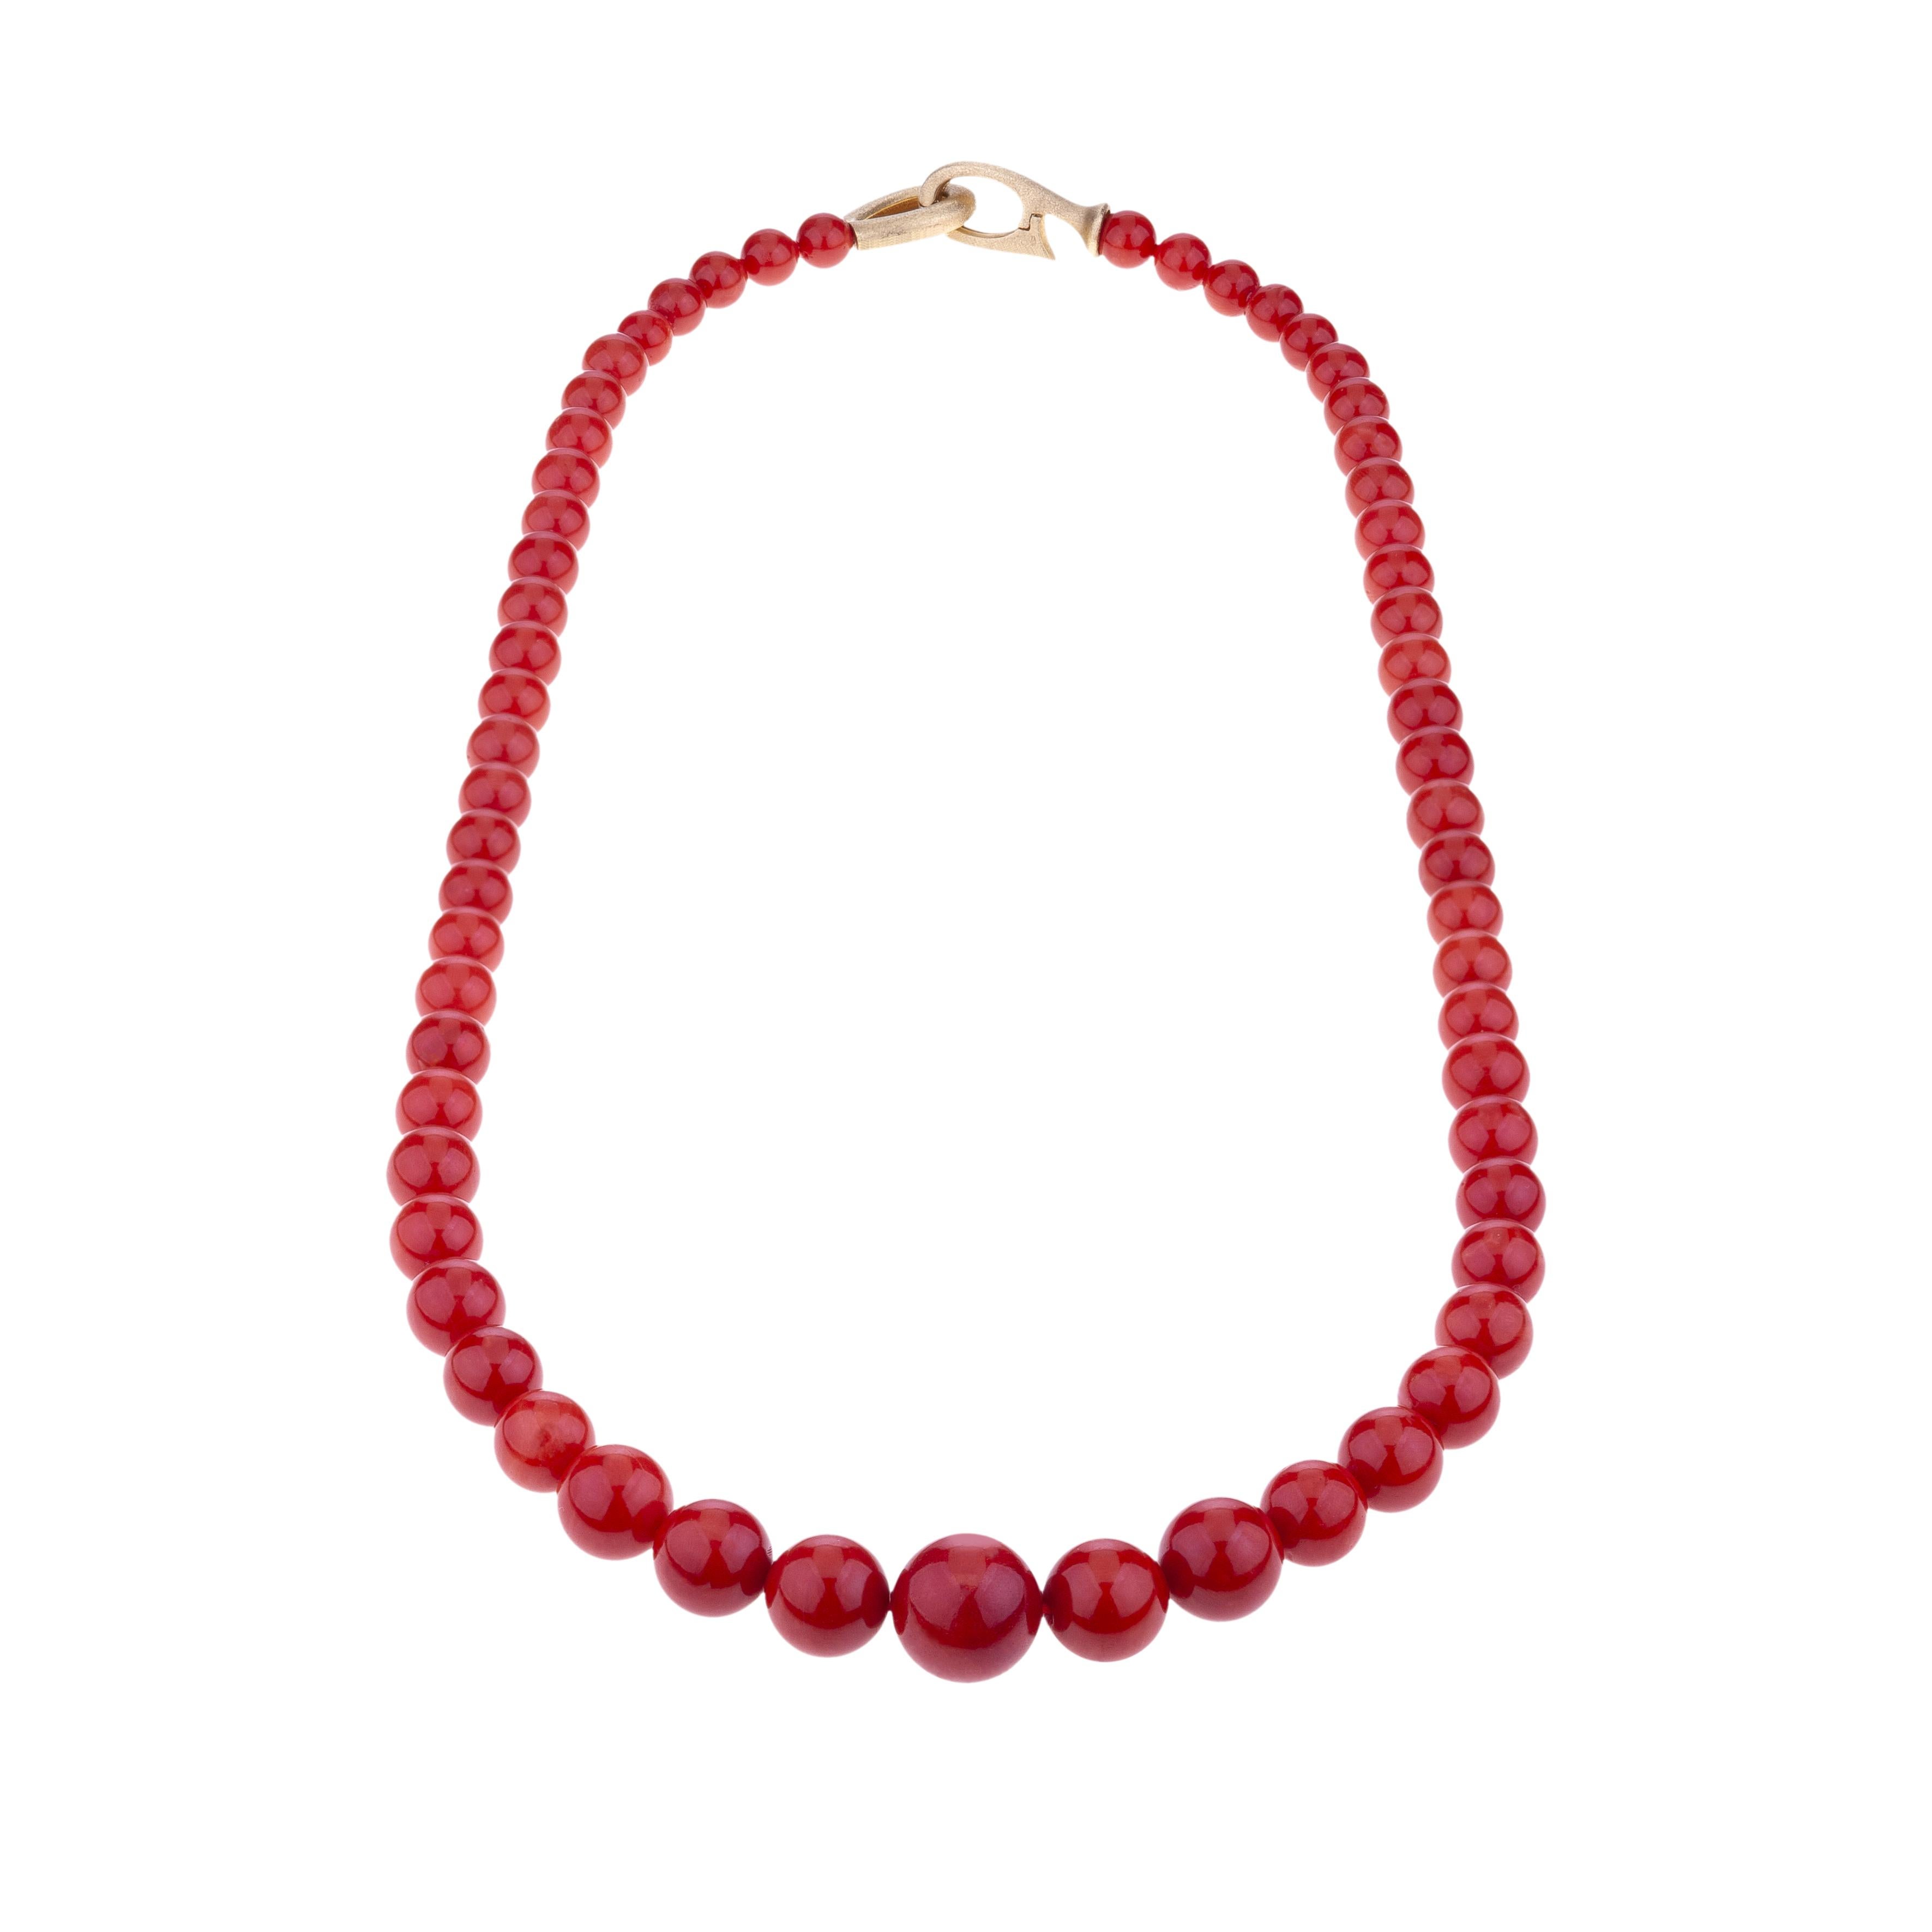 Sardinian Red Coral Bead Long Necklace 18kt Gold Clasp.
The Coral is from the Mediteranean Sea, its Intense Red is definetely Rare in the area.
High quality Coral Beads are Graduated from 15.50 to 7.3 mm and the weight of the Coral is gr. 80.50.
The